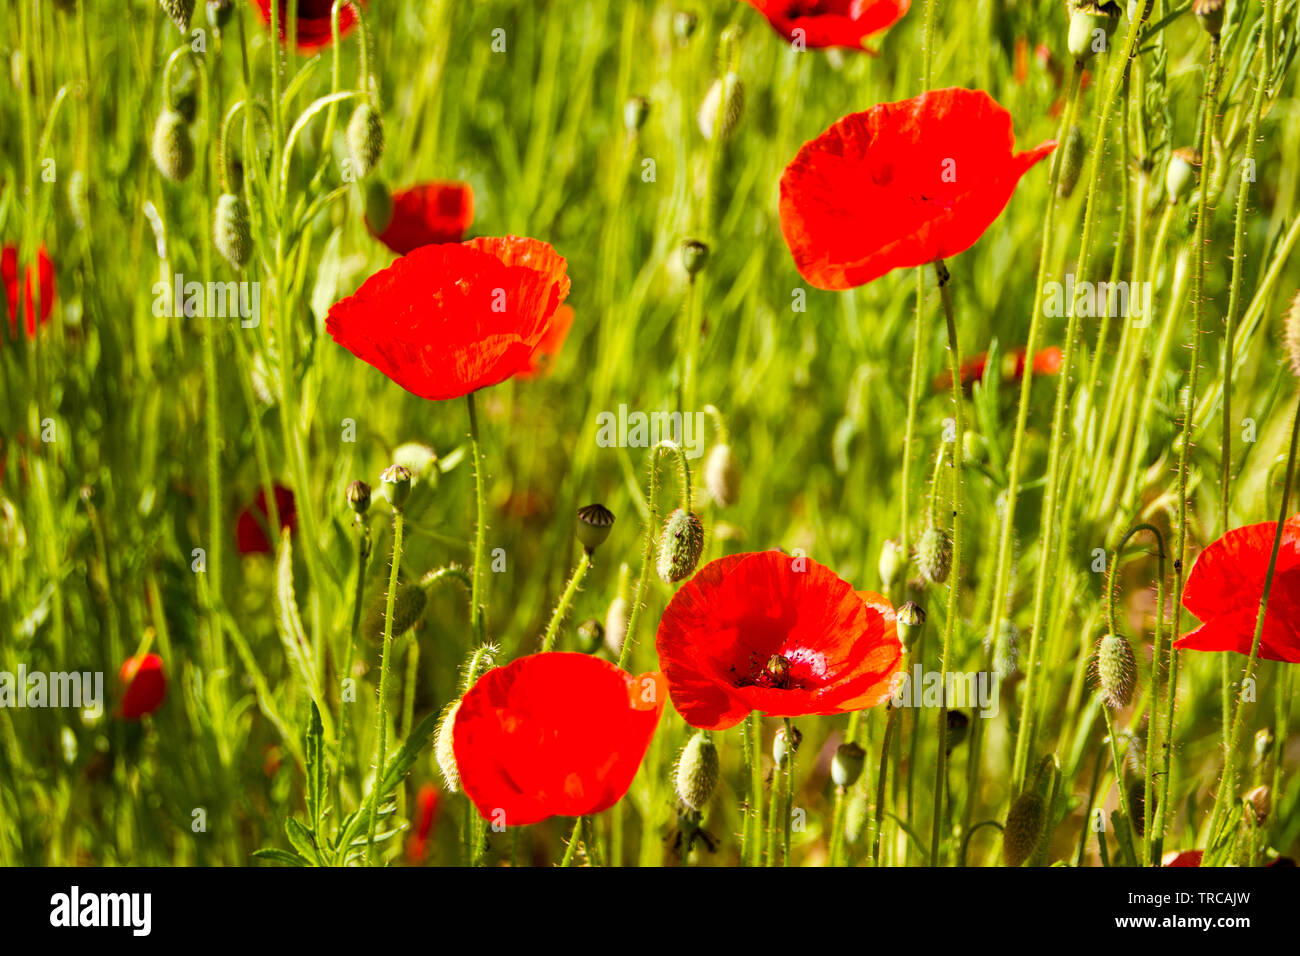 Field with red Common Poppy (Papaver rhoeas), of the poppy family Papaveraceae. The poppy is also a symbol of dead soldiers since World War 1. Stock Photo